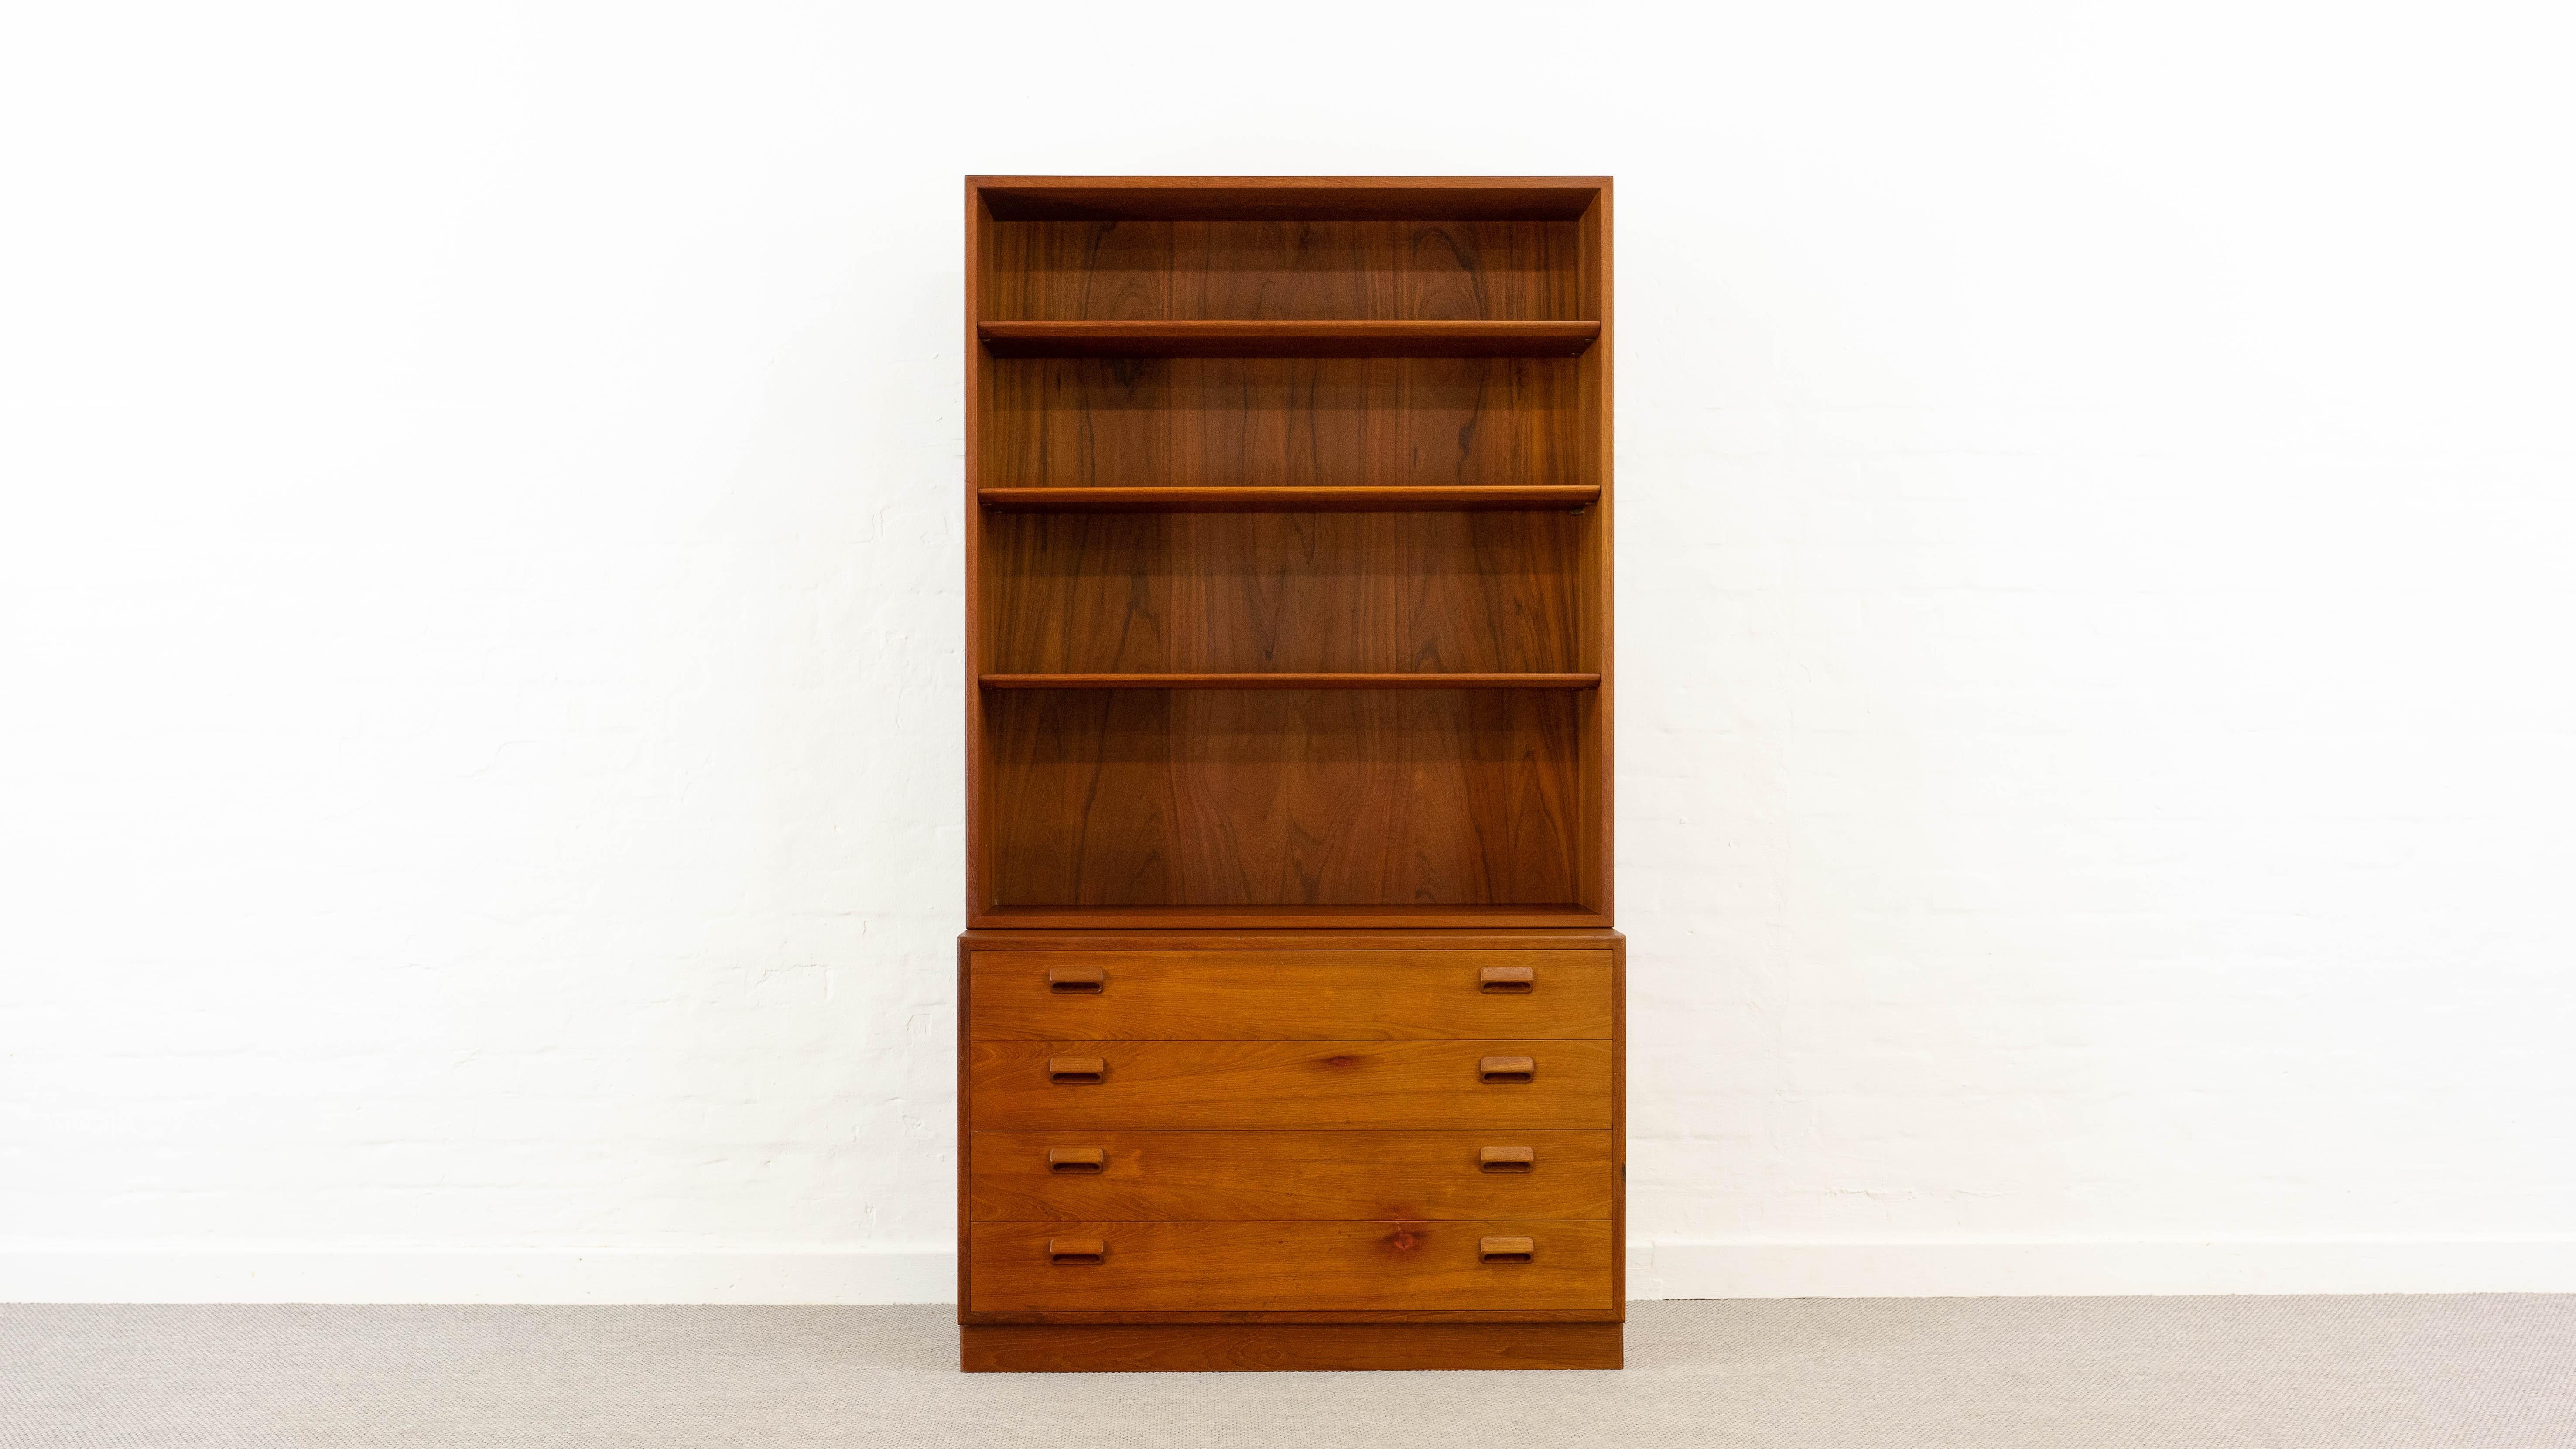 Midcentury Borge Mogensen Cupboard Elements in teak wood. Chest of Drawers and Shelf on top. Both pieces are stamped with manufacturer’s stamp and “Made in Denmark”. Chest of drawers with 4 drawers which show the characteristic Mogensen handles.